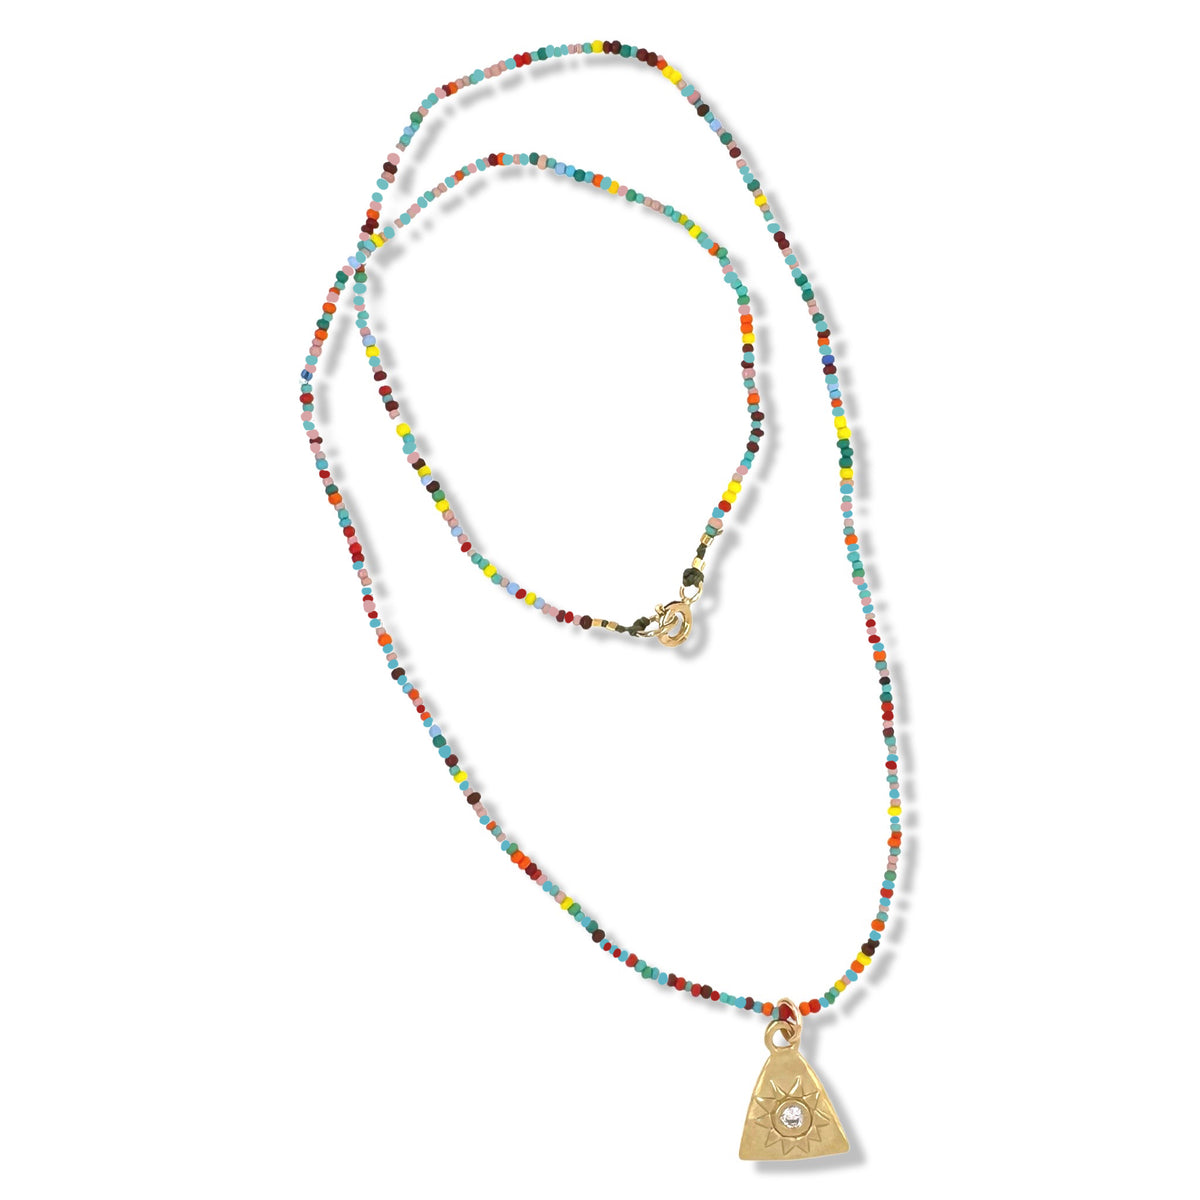 Danni Necklace in Gold on Multi Color Beads By Keely Smith Jewelry Designs